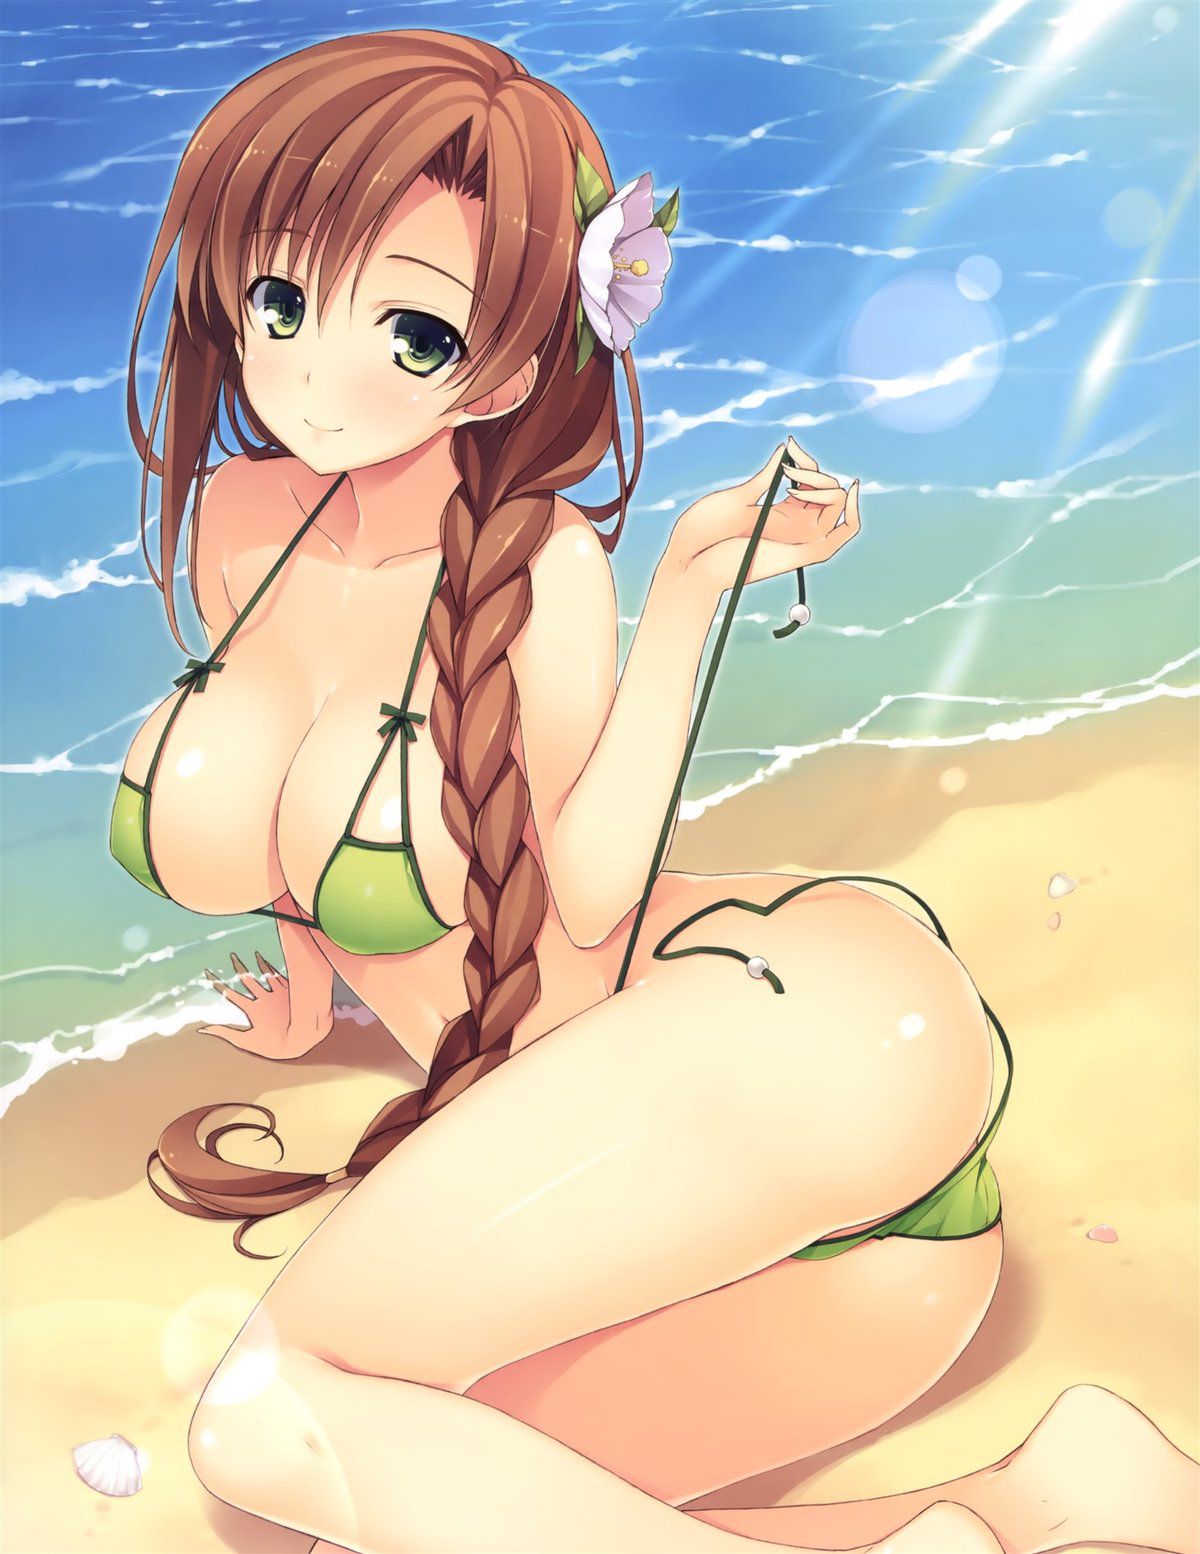 Swimsuit I want to see the image of swimsuit I'm a lewd I'm I'm that cloth area 3